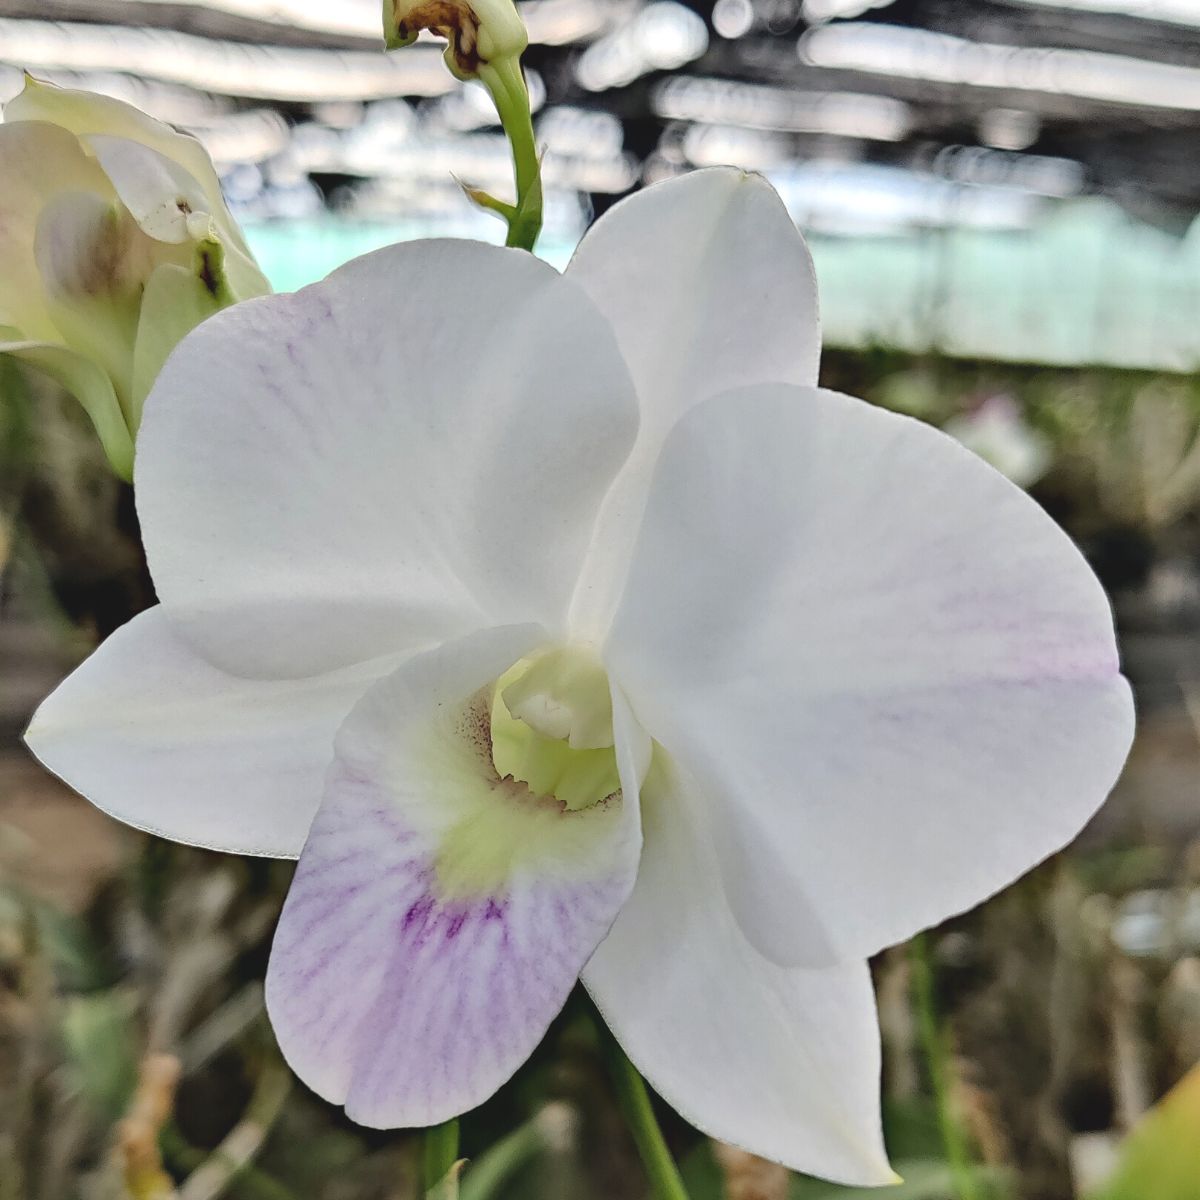 Dendrobium Sonia White orchid showcasing its elegant white blooms and delicate petals in full bloom